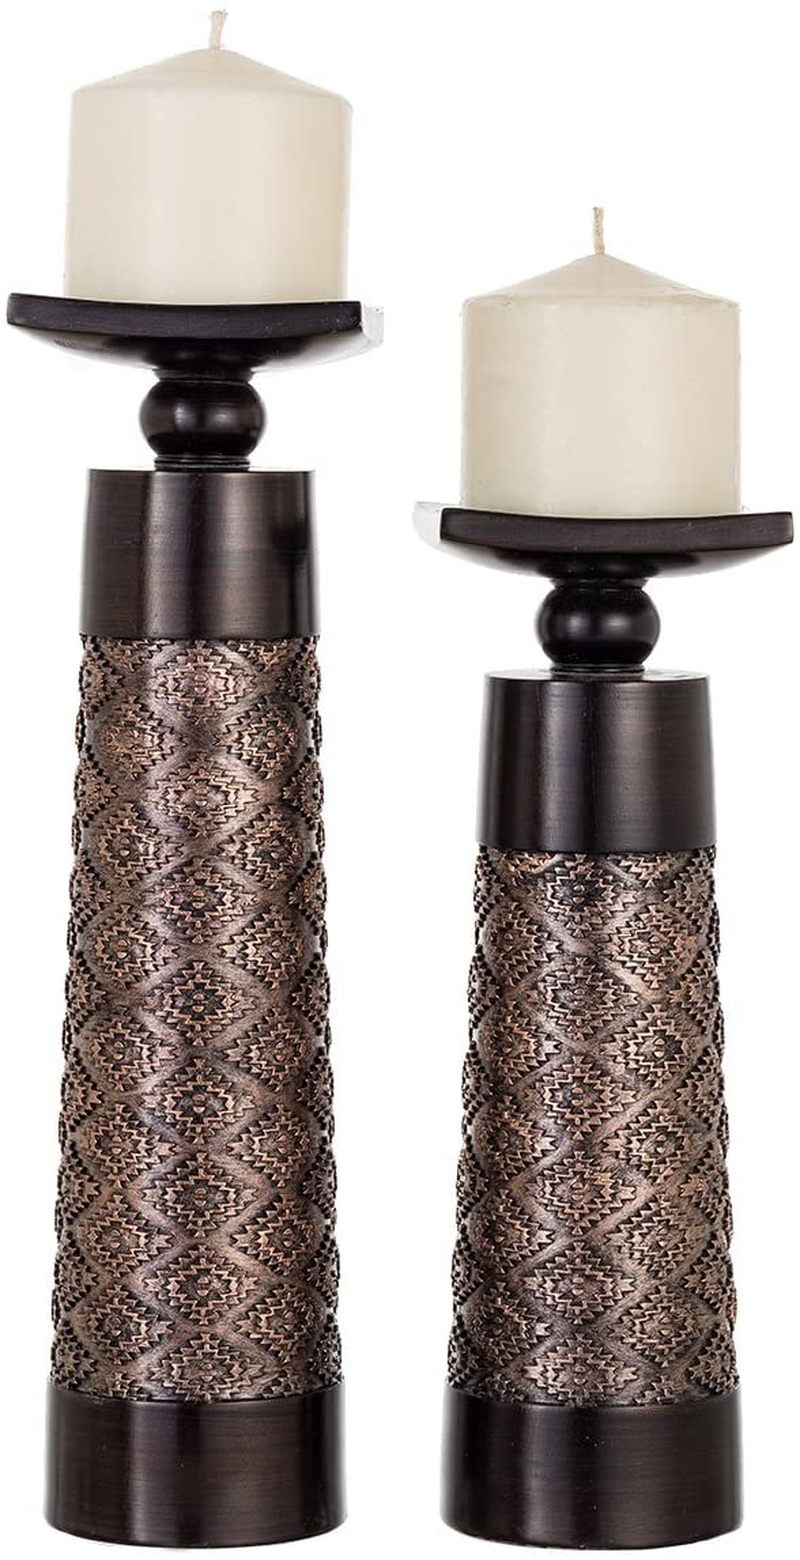 Dublin Decorative Candle Holder Set of 2 - Home Decor Pillar Candle Stand, Coffee Table Mantle Decor Centerpieces for Fireplace, Living or Dining Room Table, Gift Boxed (Coffee Brown) Home & Garden > Decor > Home Fragrance Accessories > Candle Holders Creative Scents Default Title  